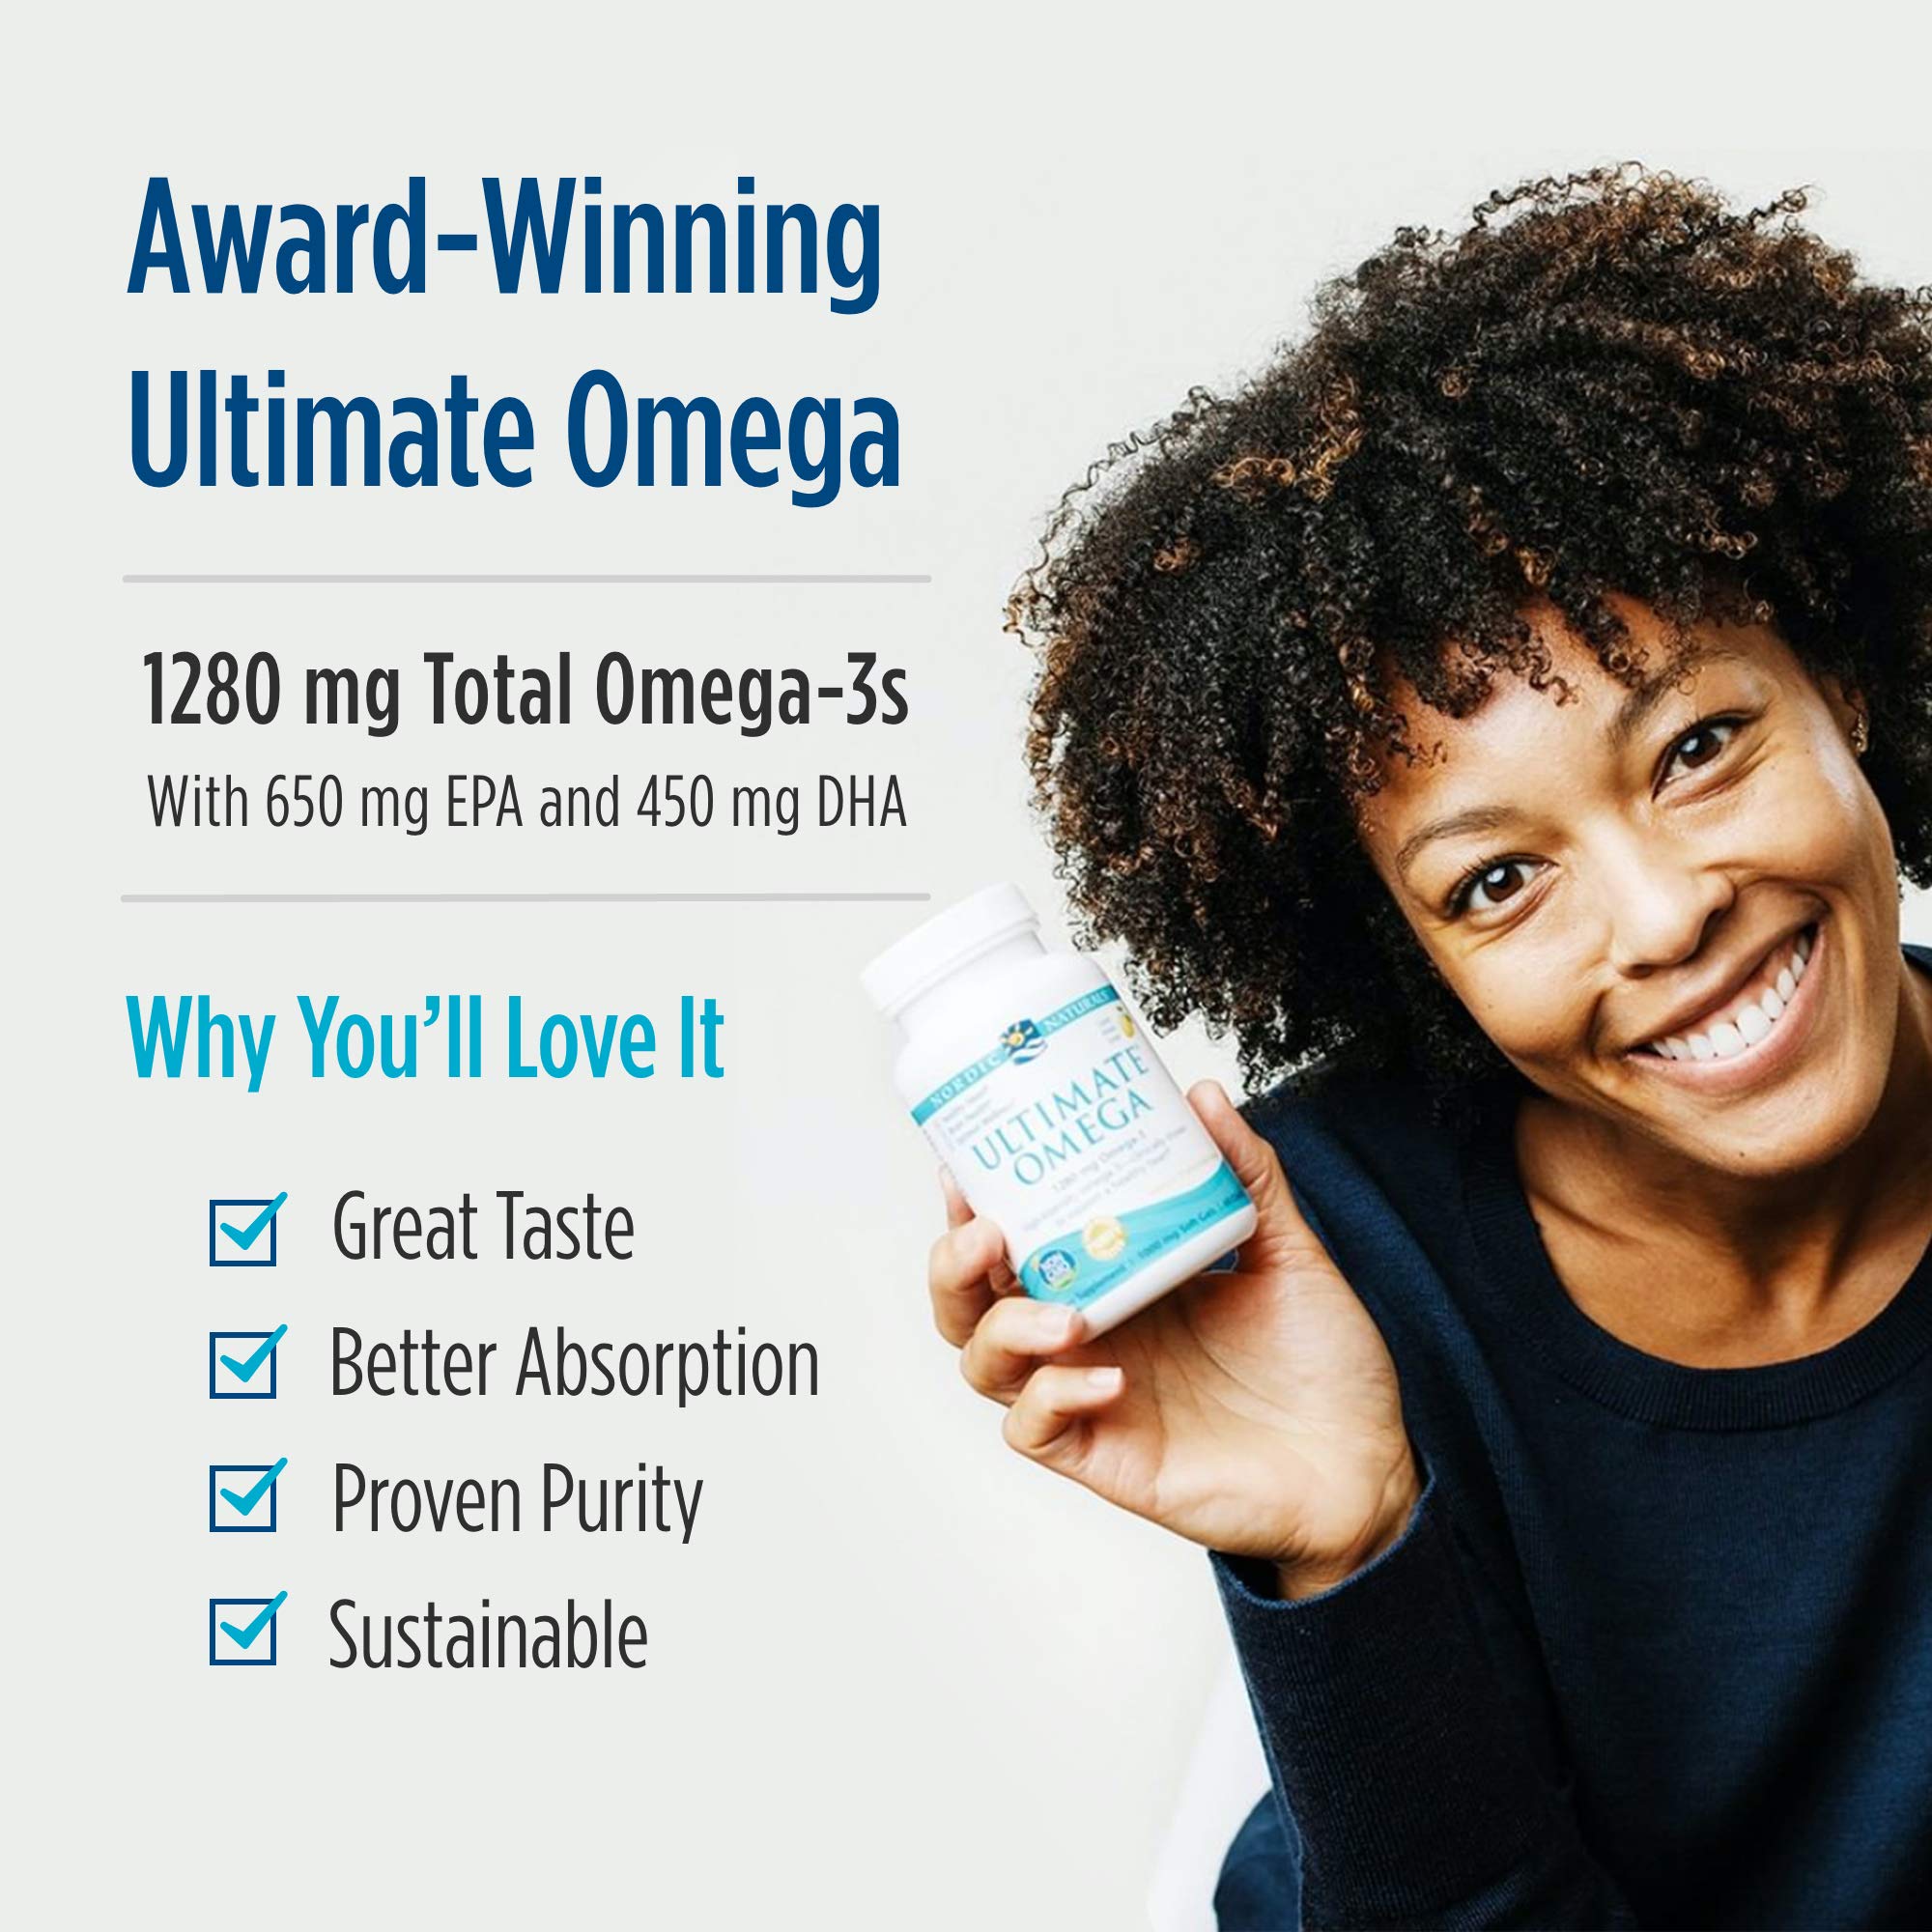 Nordic Naturals Ultimate Omega, Lemon Flavor - 1280 mg Omega-3-60 Soft Gels - High-Potency Omega-3 Fish Oil Supplement with EPA & DHA - Promotes Brain & Heart Health - Non-GMO - 30 Servings